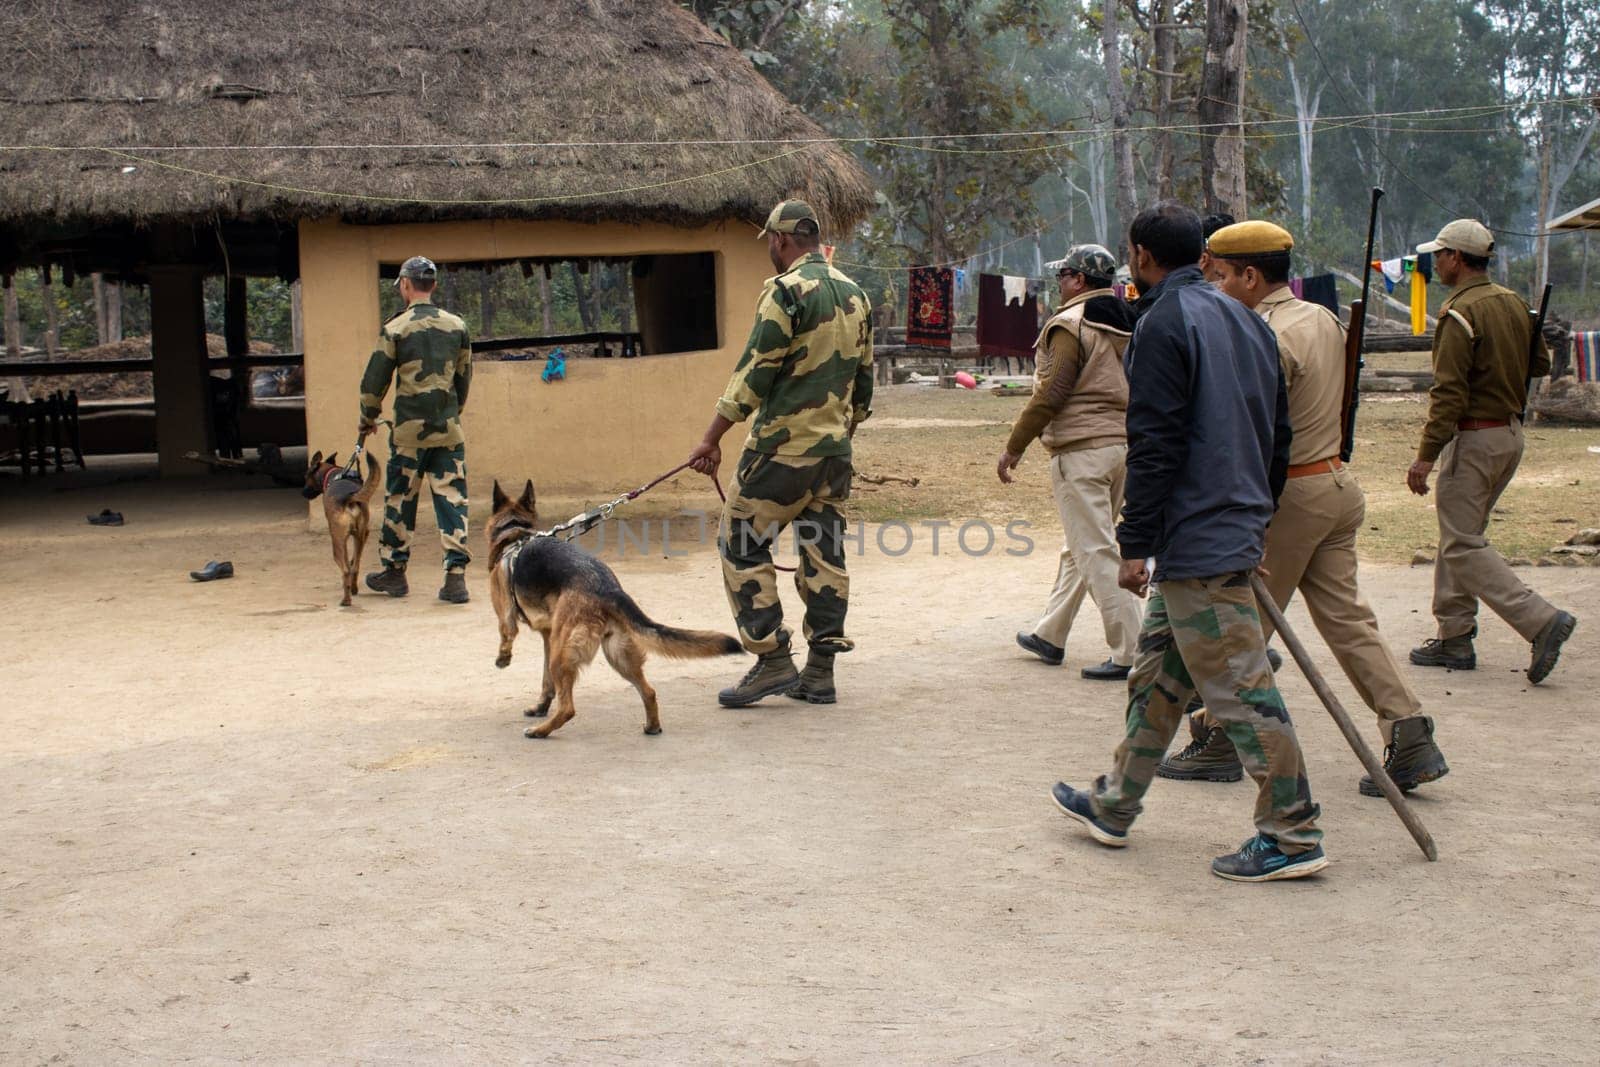 Trained dogs in Uttarakhand embark on a mission to track and uncover illegal activities.High quality image